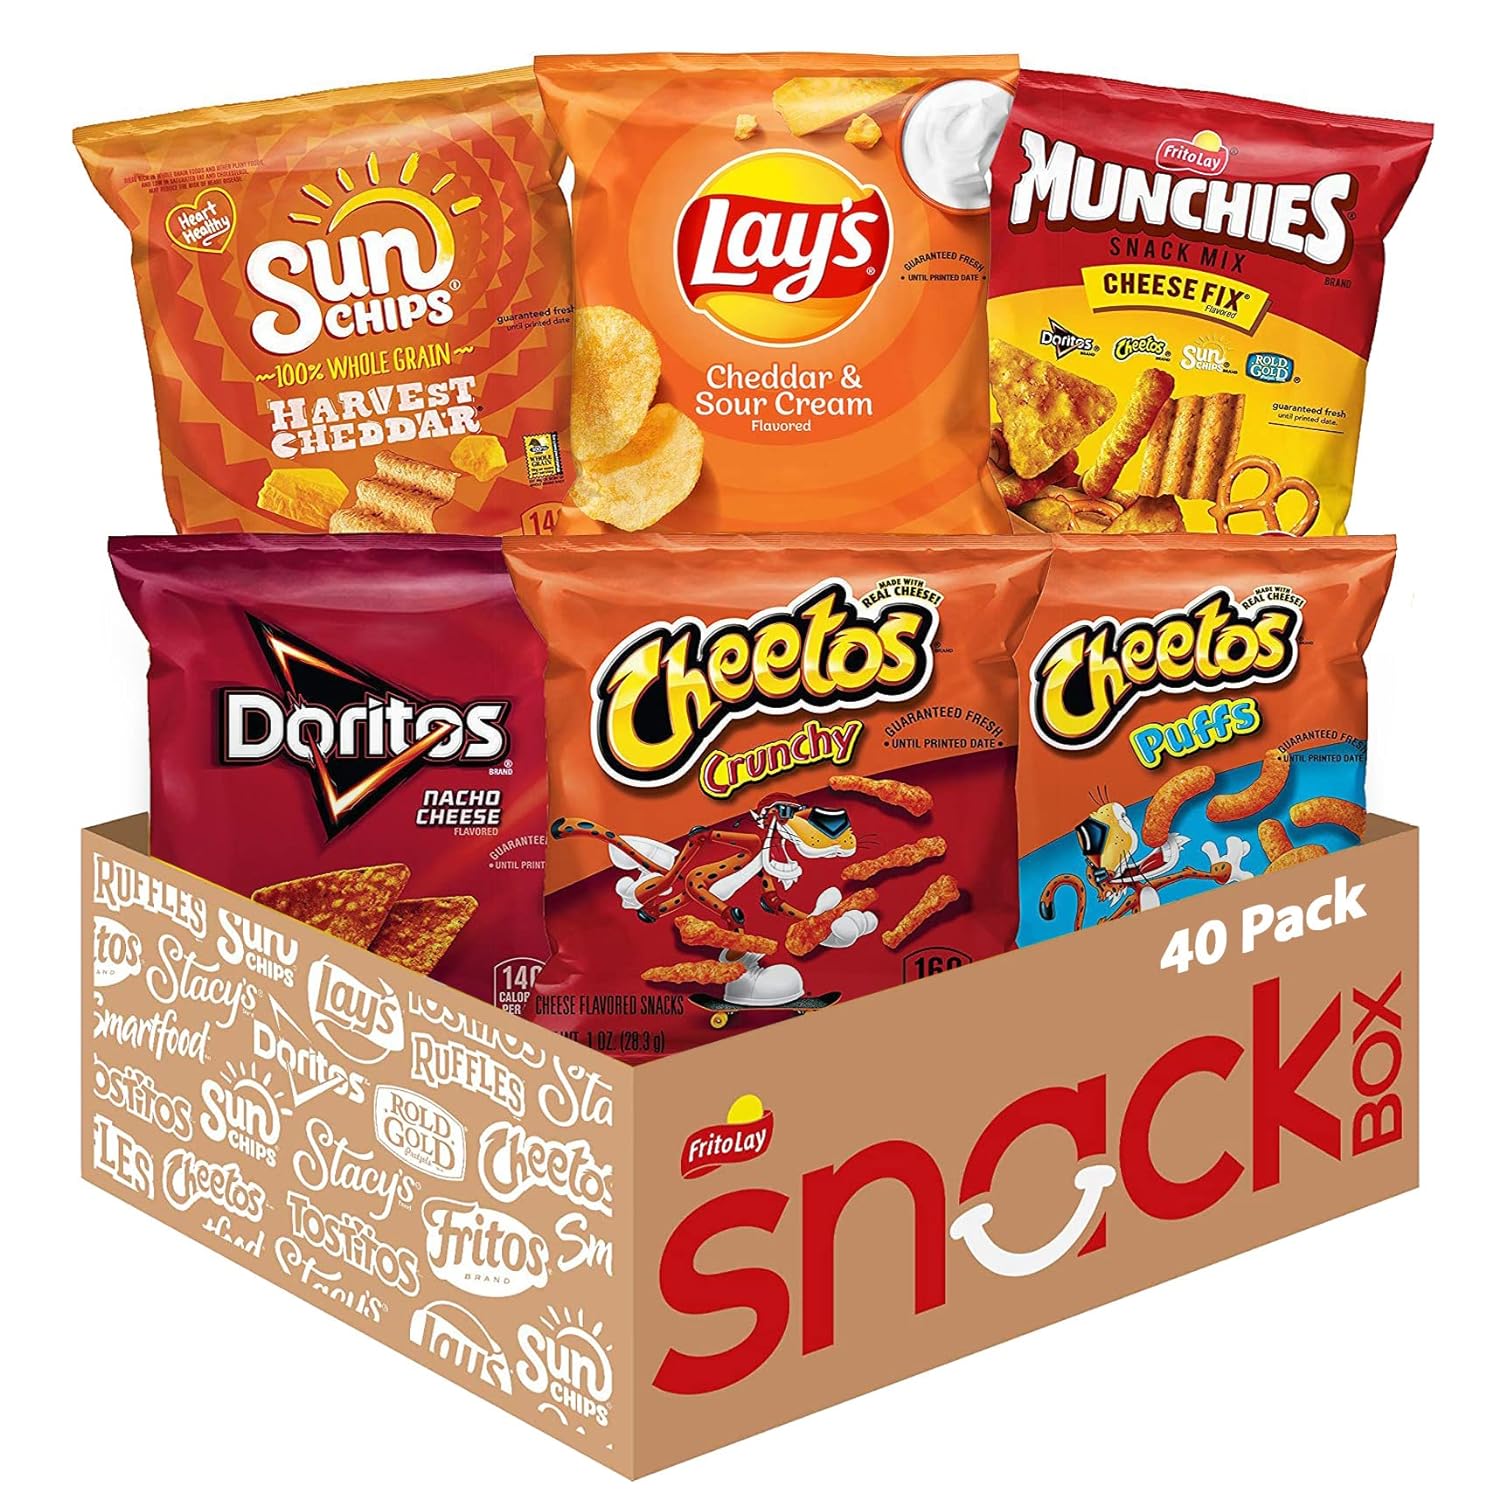 I ordered these because of the price. They don't say the expectation date is up on the packages. The Cheetos are stale. Ugh. Doritos were ok but now I am not going to try the rest. I took them to the salvation army and donated. Shame on you for selling items at a discount when they are ready to expire